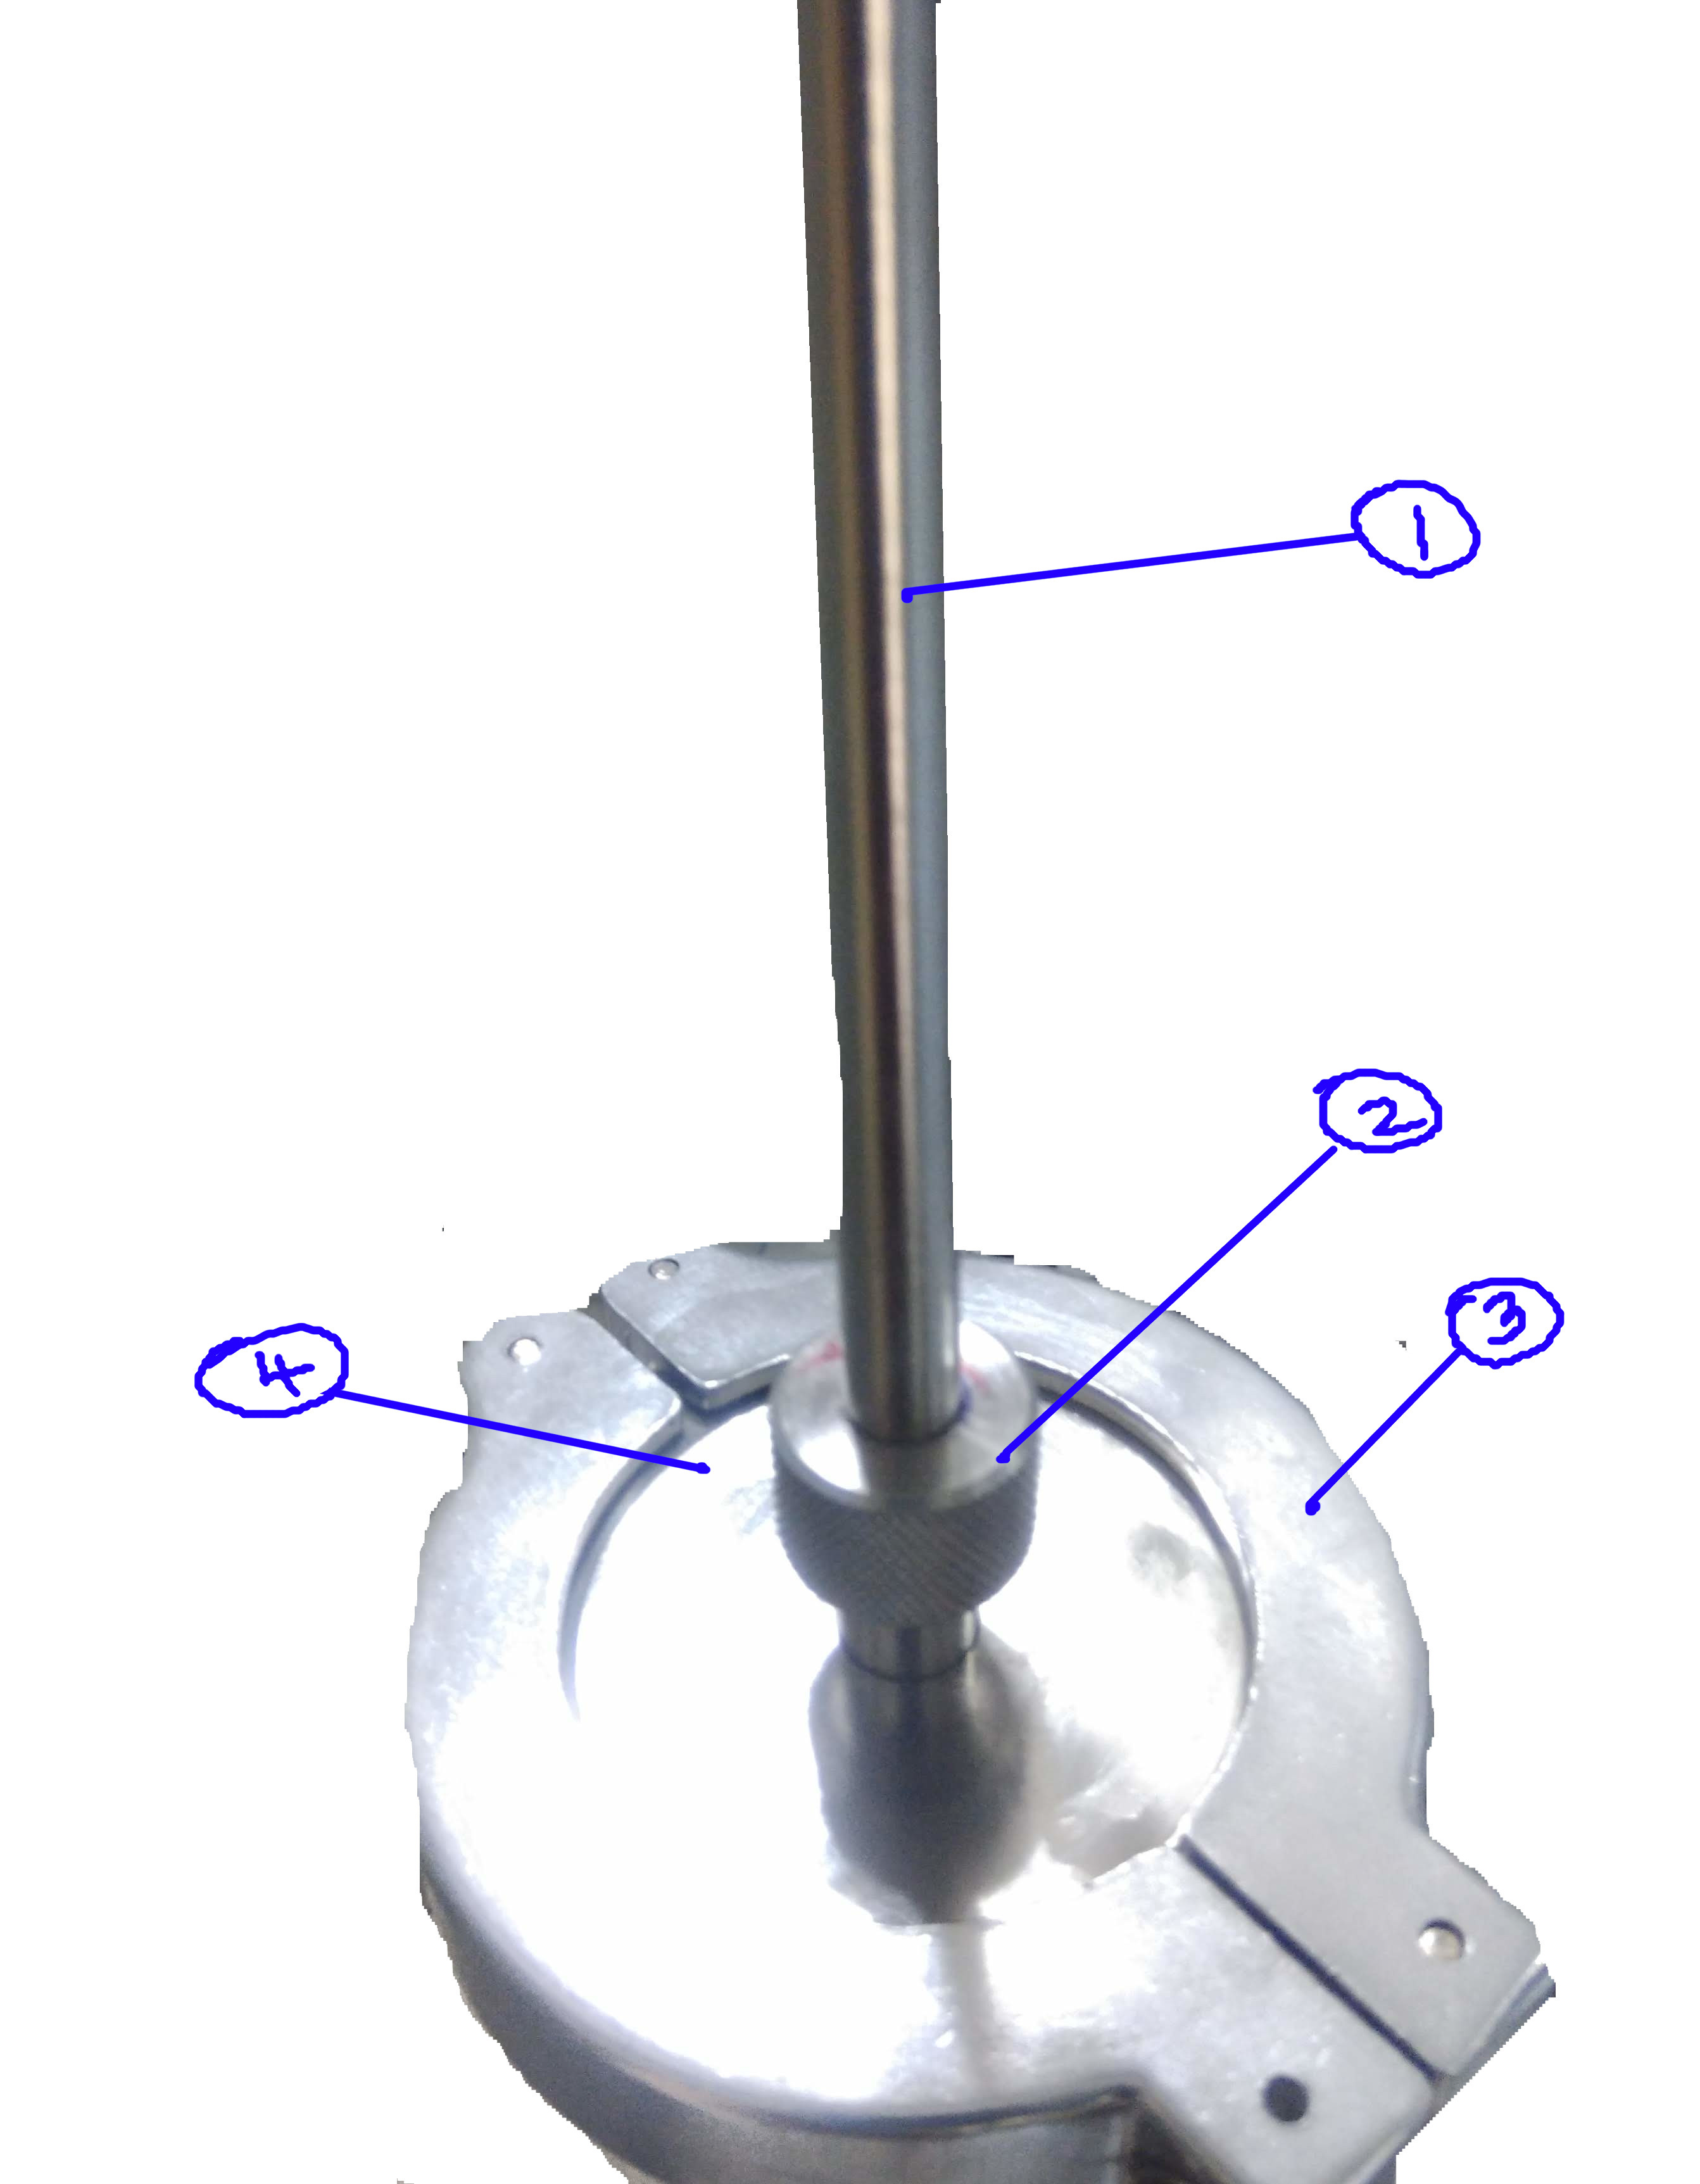 [[fig:View-Port-1]]{#fig:View-Port-1 label="fig:View-Port-1"}Sample insertion. 1)Probe stick 2) Rotatable Gripper of probe 3) Clamp 4) Quick clamp (shipping cap)